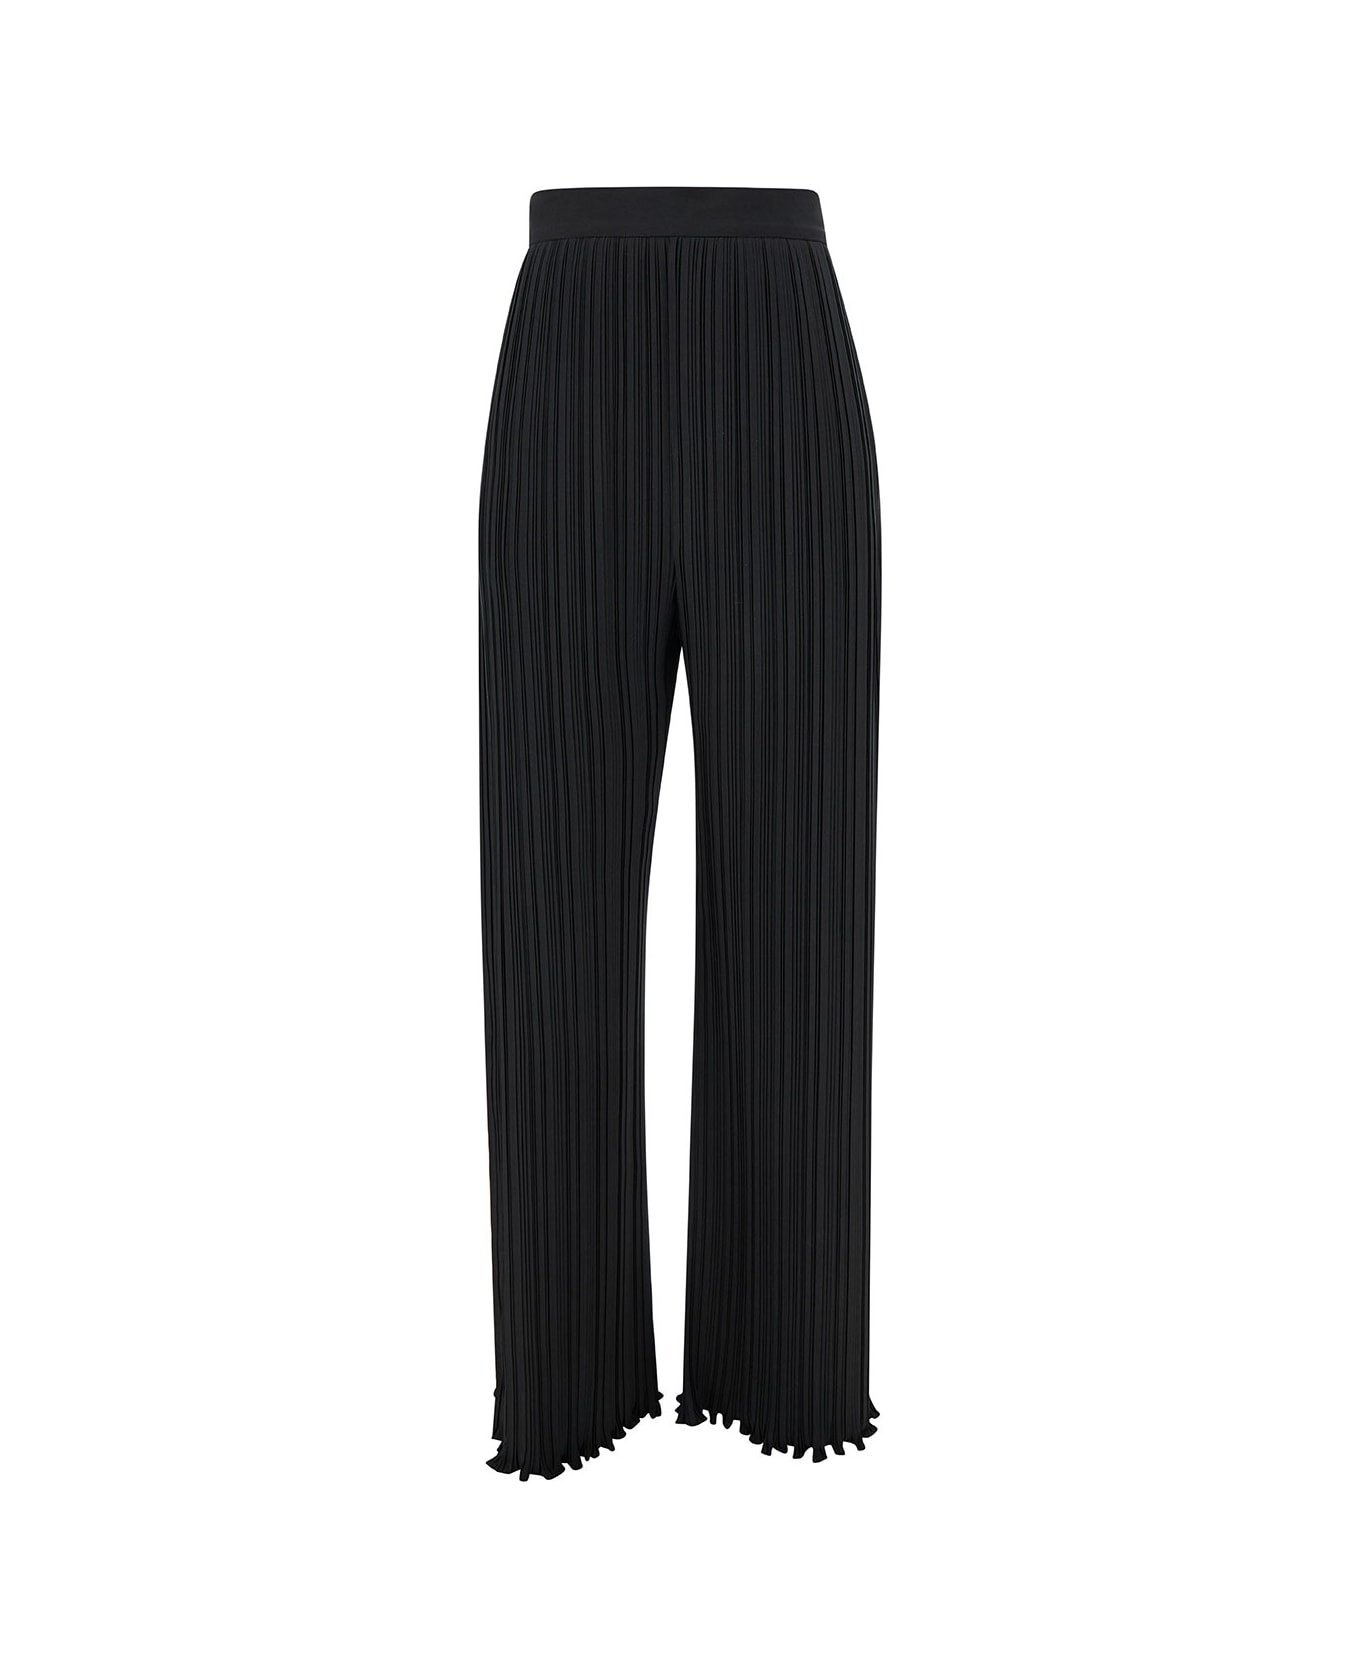 Lanvin Black Pleated Pants With Invisible Zip In Crêpe De Chine Woman - Black